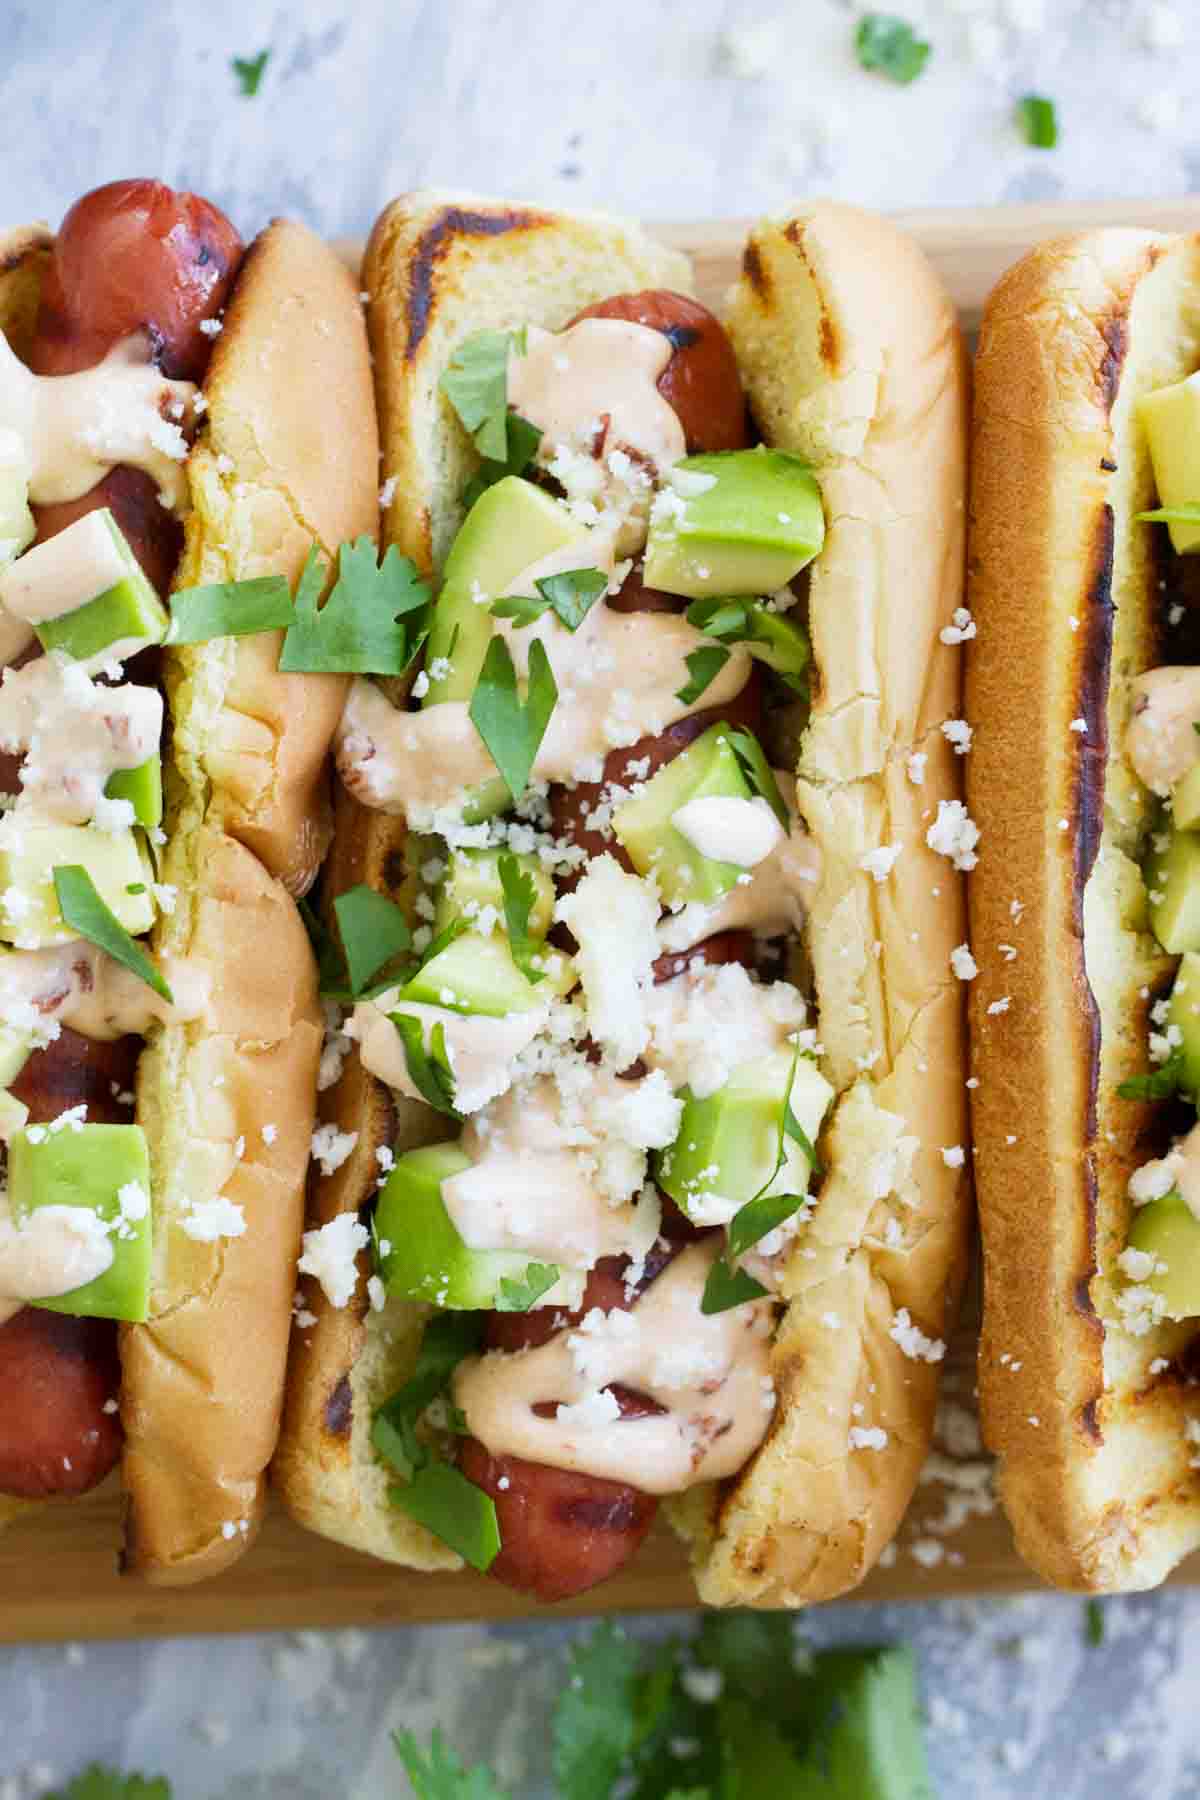 Mexican Hot Dogs (Easy Recipe) - Insanely Good